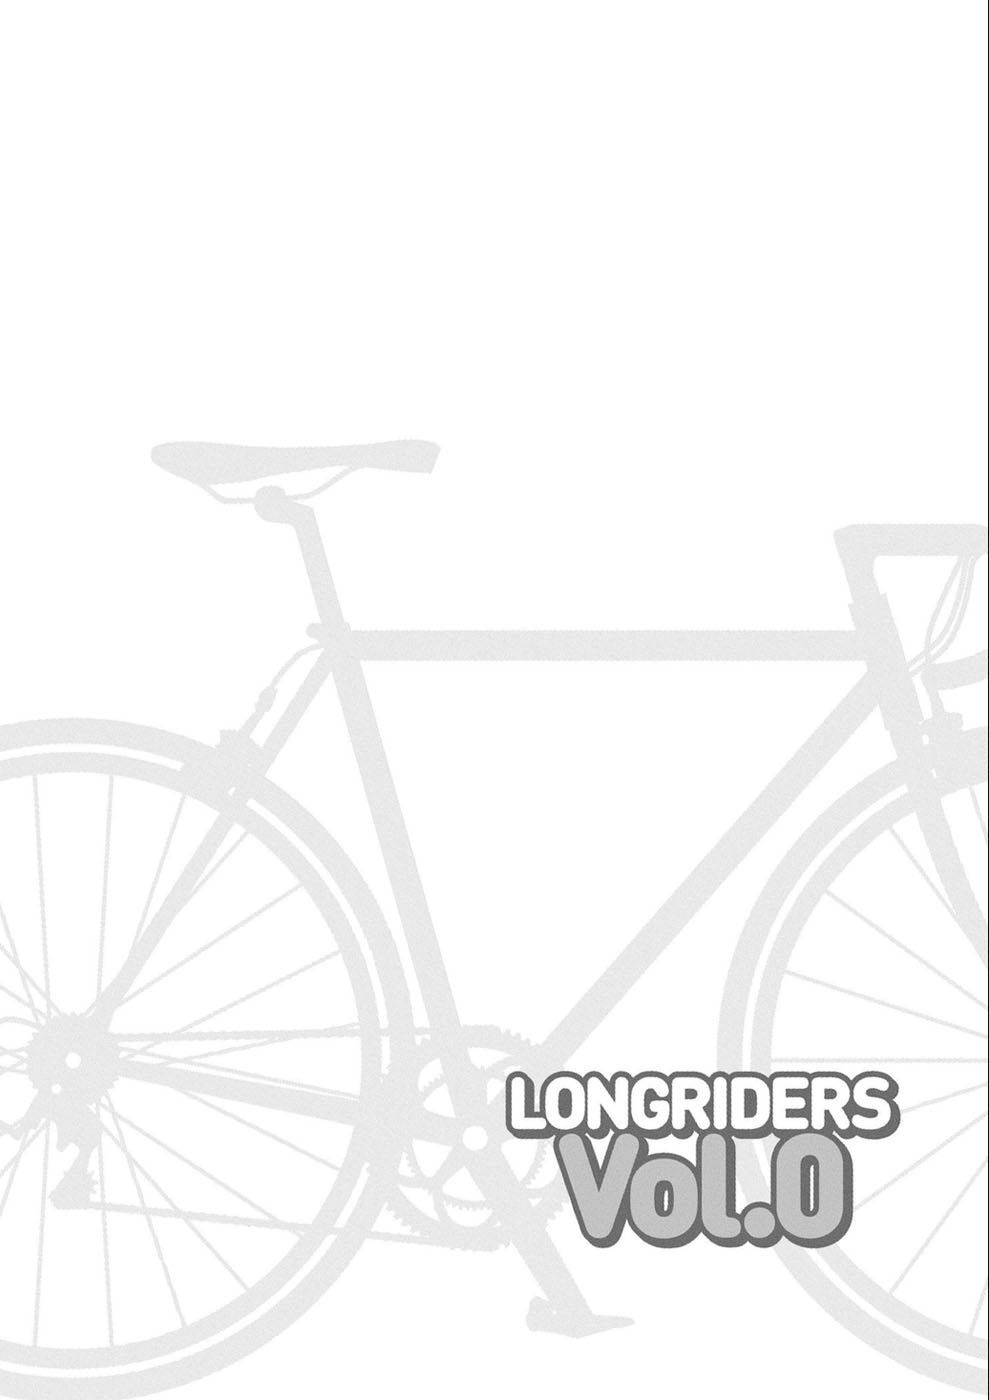 Long Riders! Vol.5.5 Chapter 22.3: Long Riders 2.5 Web Comic - Picture 1